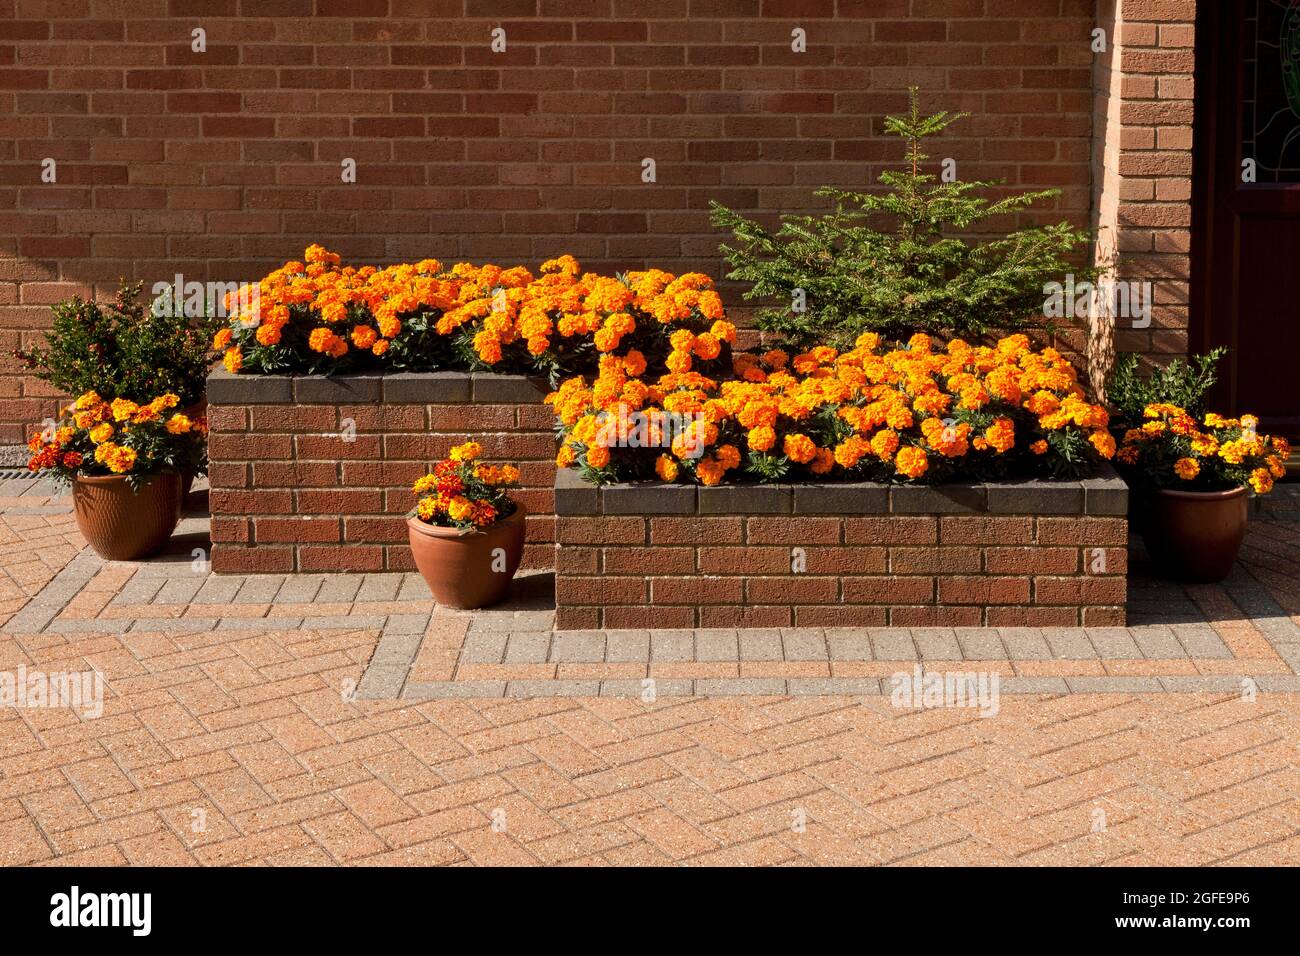 Raised Flower Bed on a Patio with pots Stock Photo